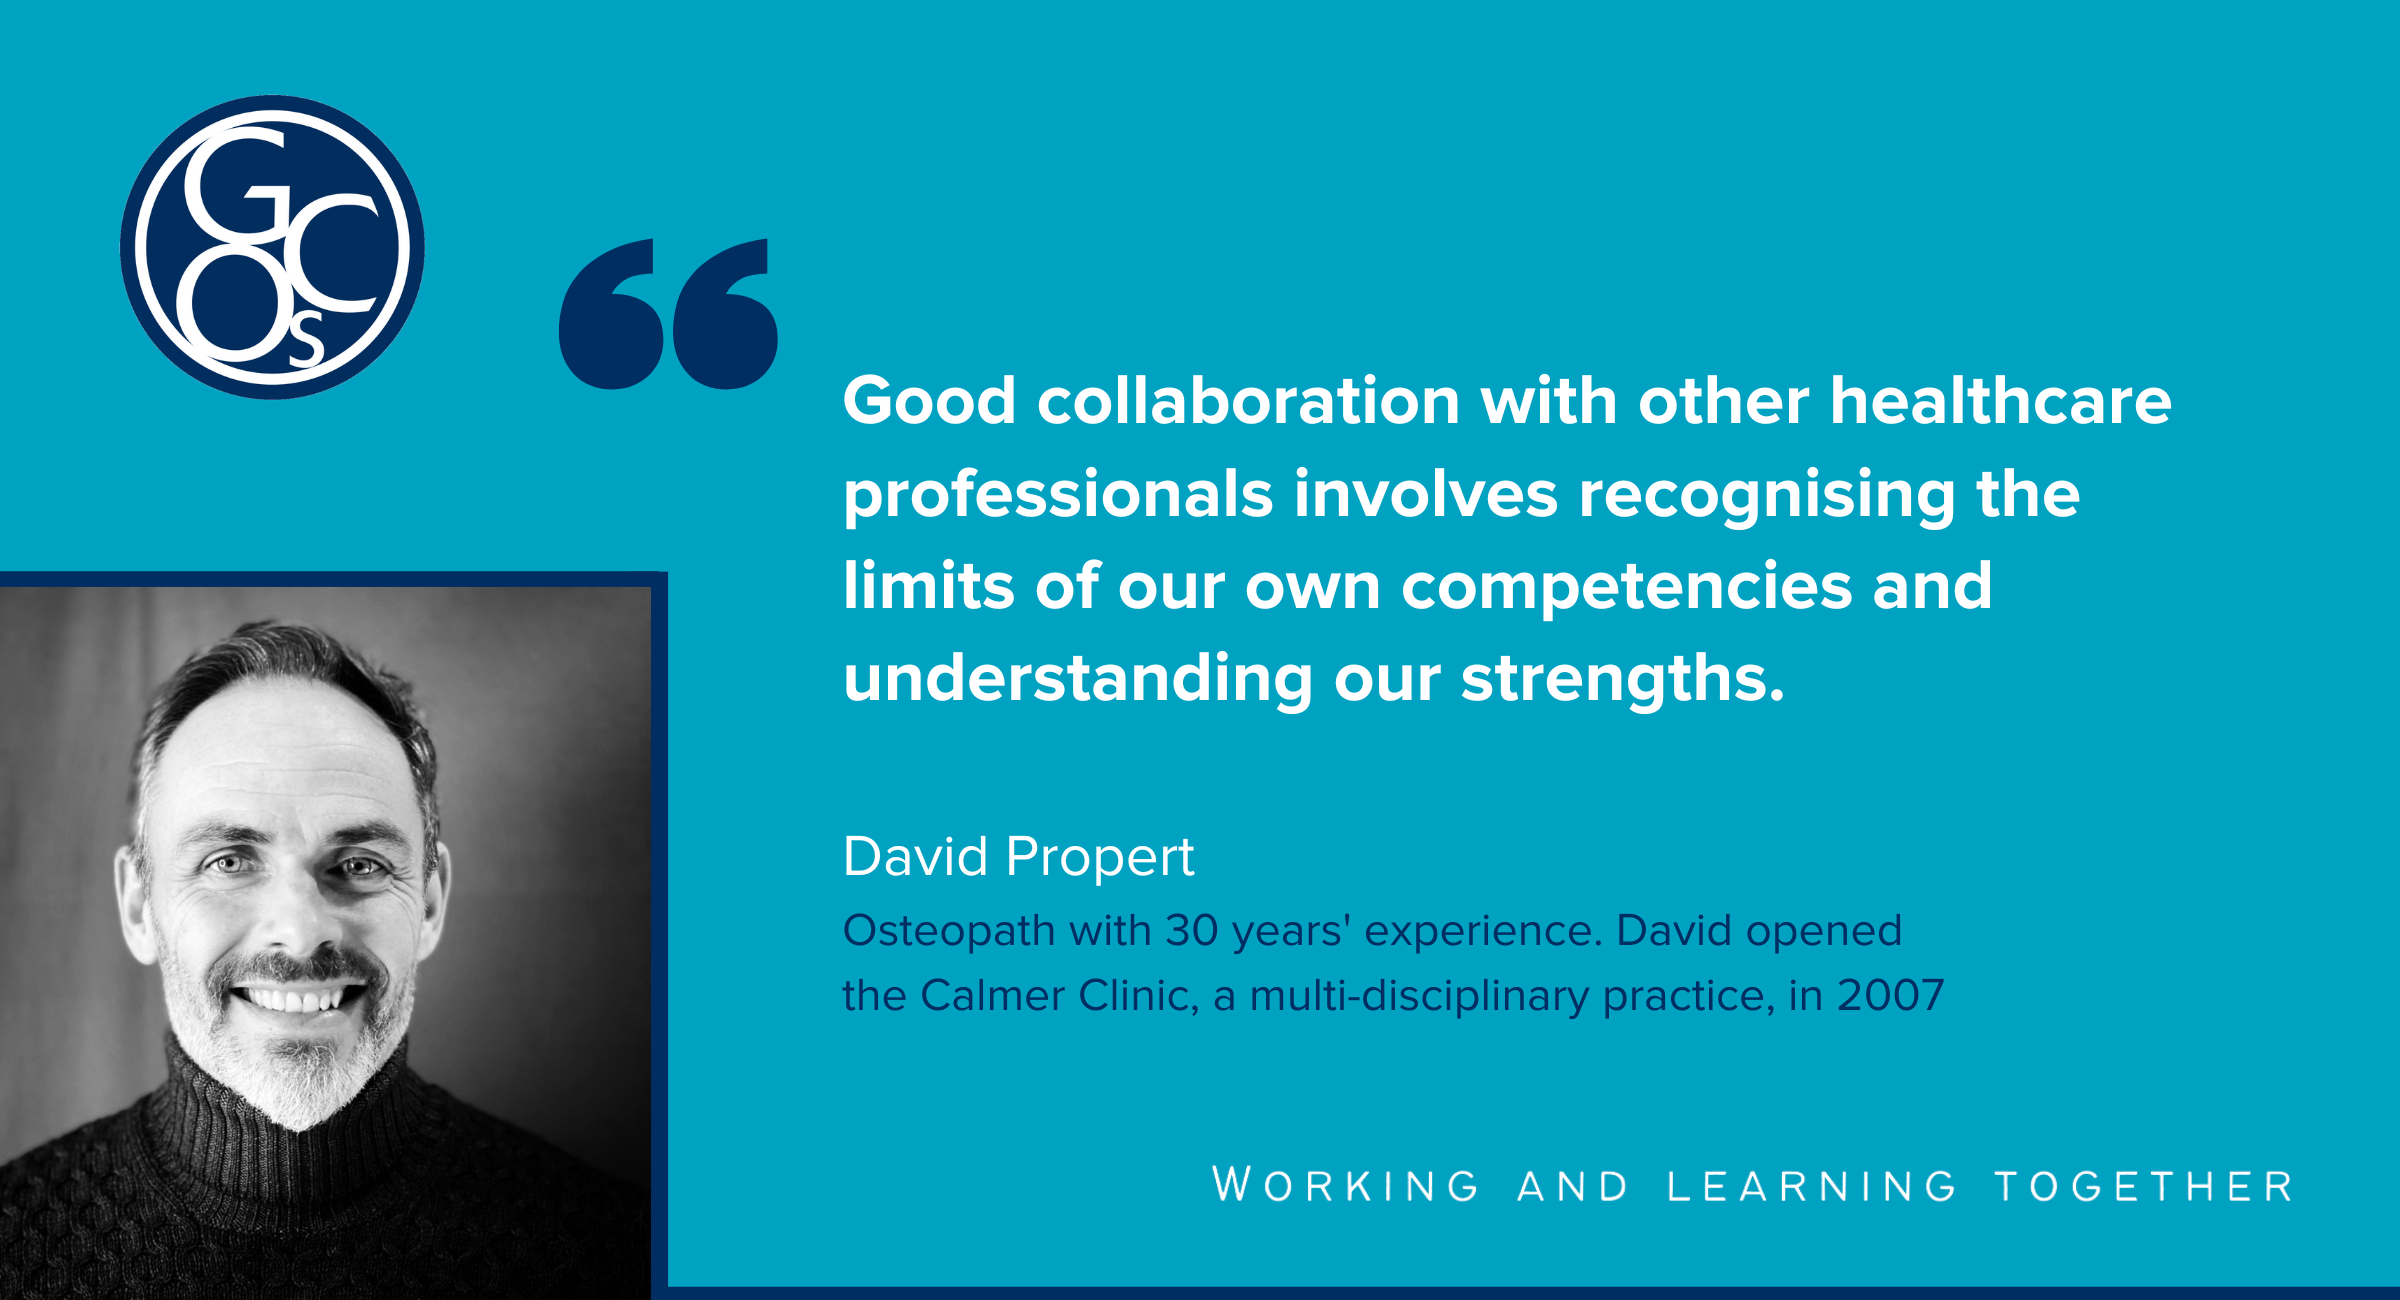 A quote from David Propert reading 'Good collaboration with other healthcare professionals involves recognising the limits of our own competencies and understanding our strengths.'